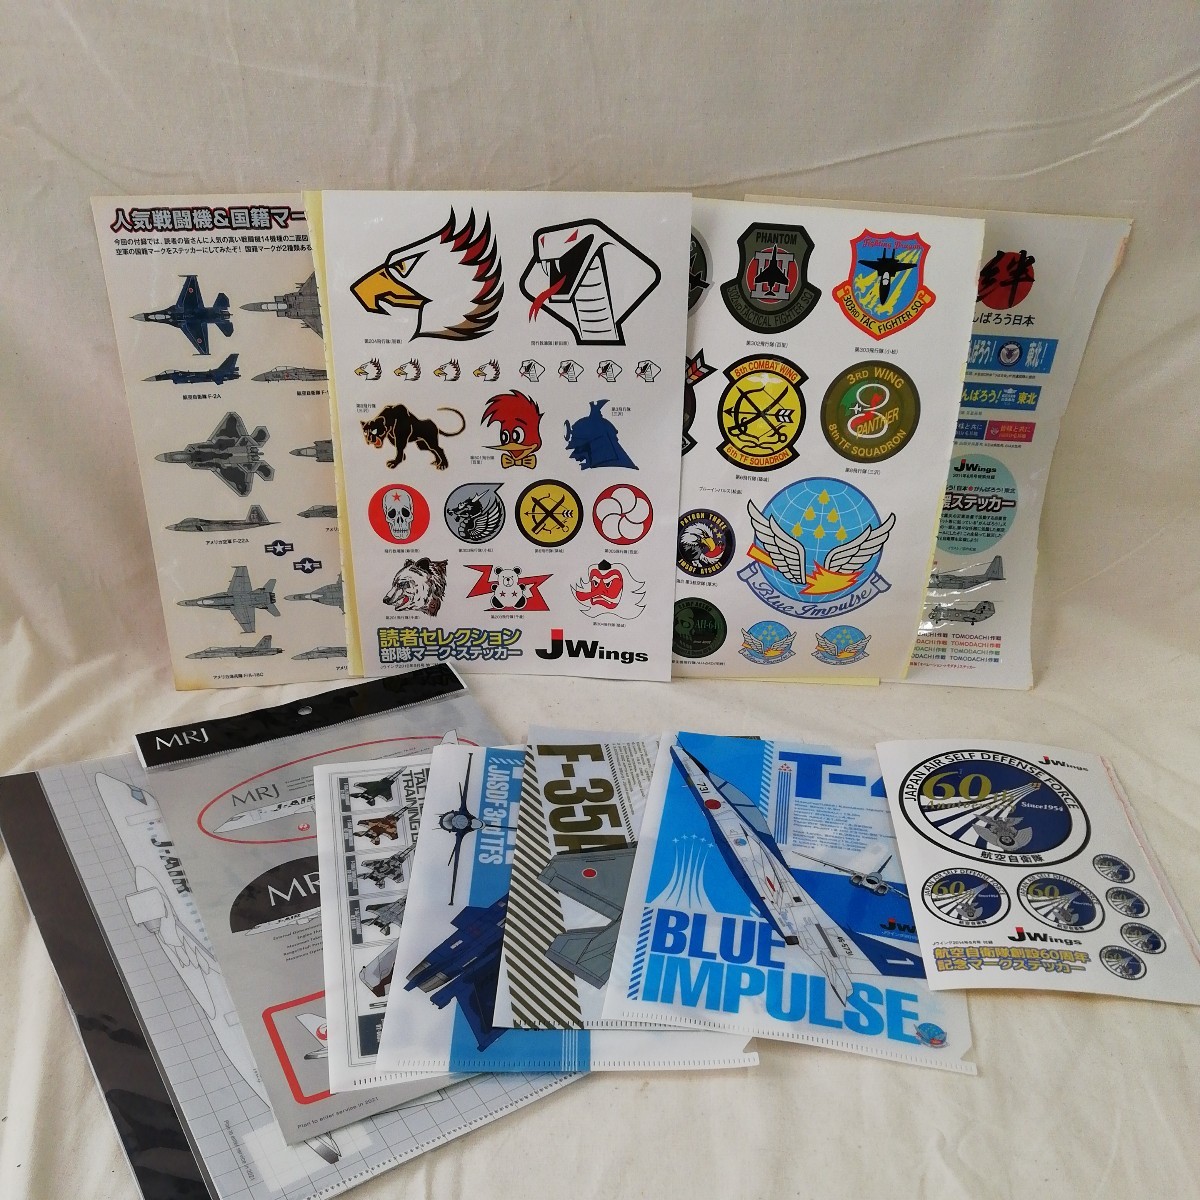 g_t　P599　航空自衛隊　飛行隊　ロゴマーク　ステッカー　クリアファイル　まとめ売り　JAL　JASDF　JWings　中古_画像1